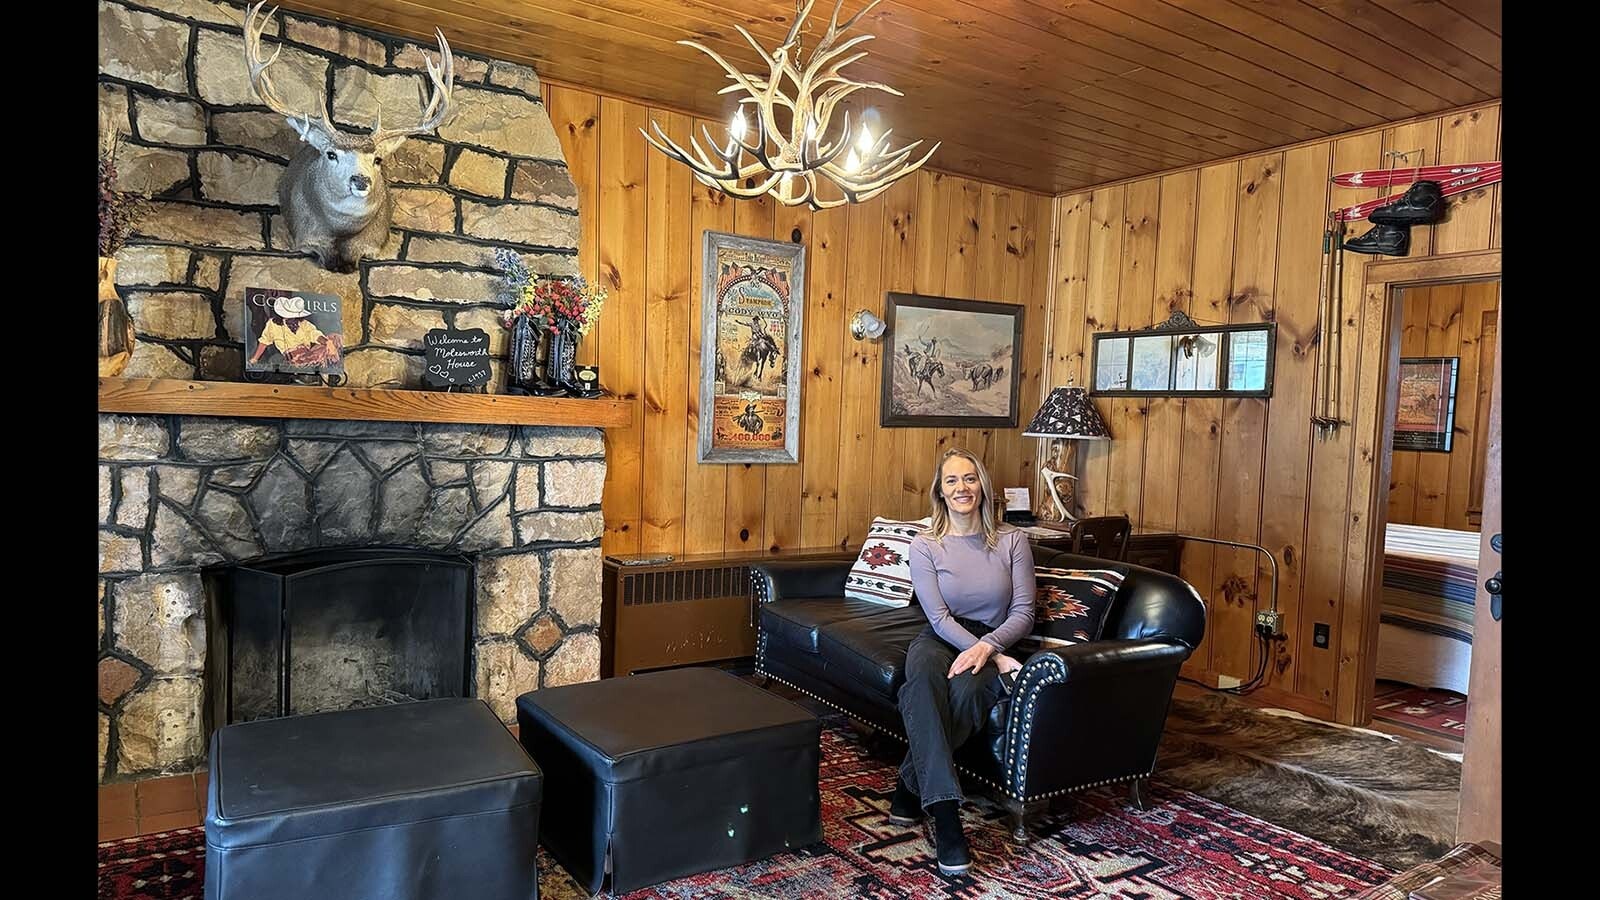 Abby Resch of the Cody Lodging Co. sits in the living room of the Molesworth House in Cody. Thomas Molesworth designed and built the house in 1937 with his master craftsman, Paul Hindman. Known for his furniture and other interior creations, the Cody house is the only structure Molesworth designed and built.